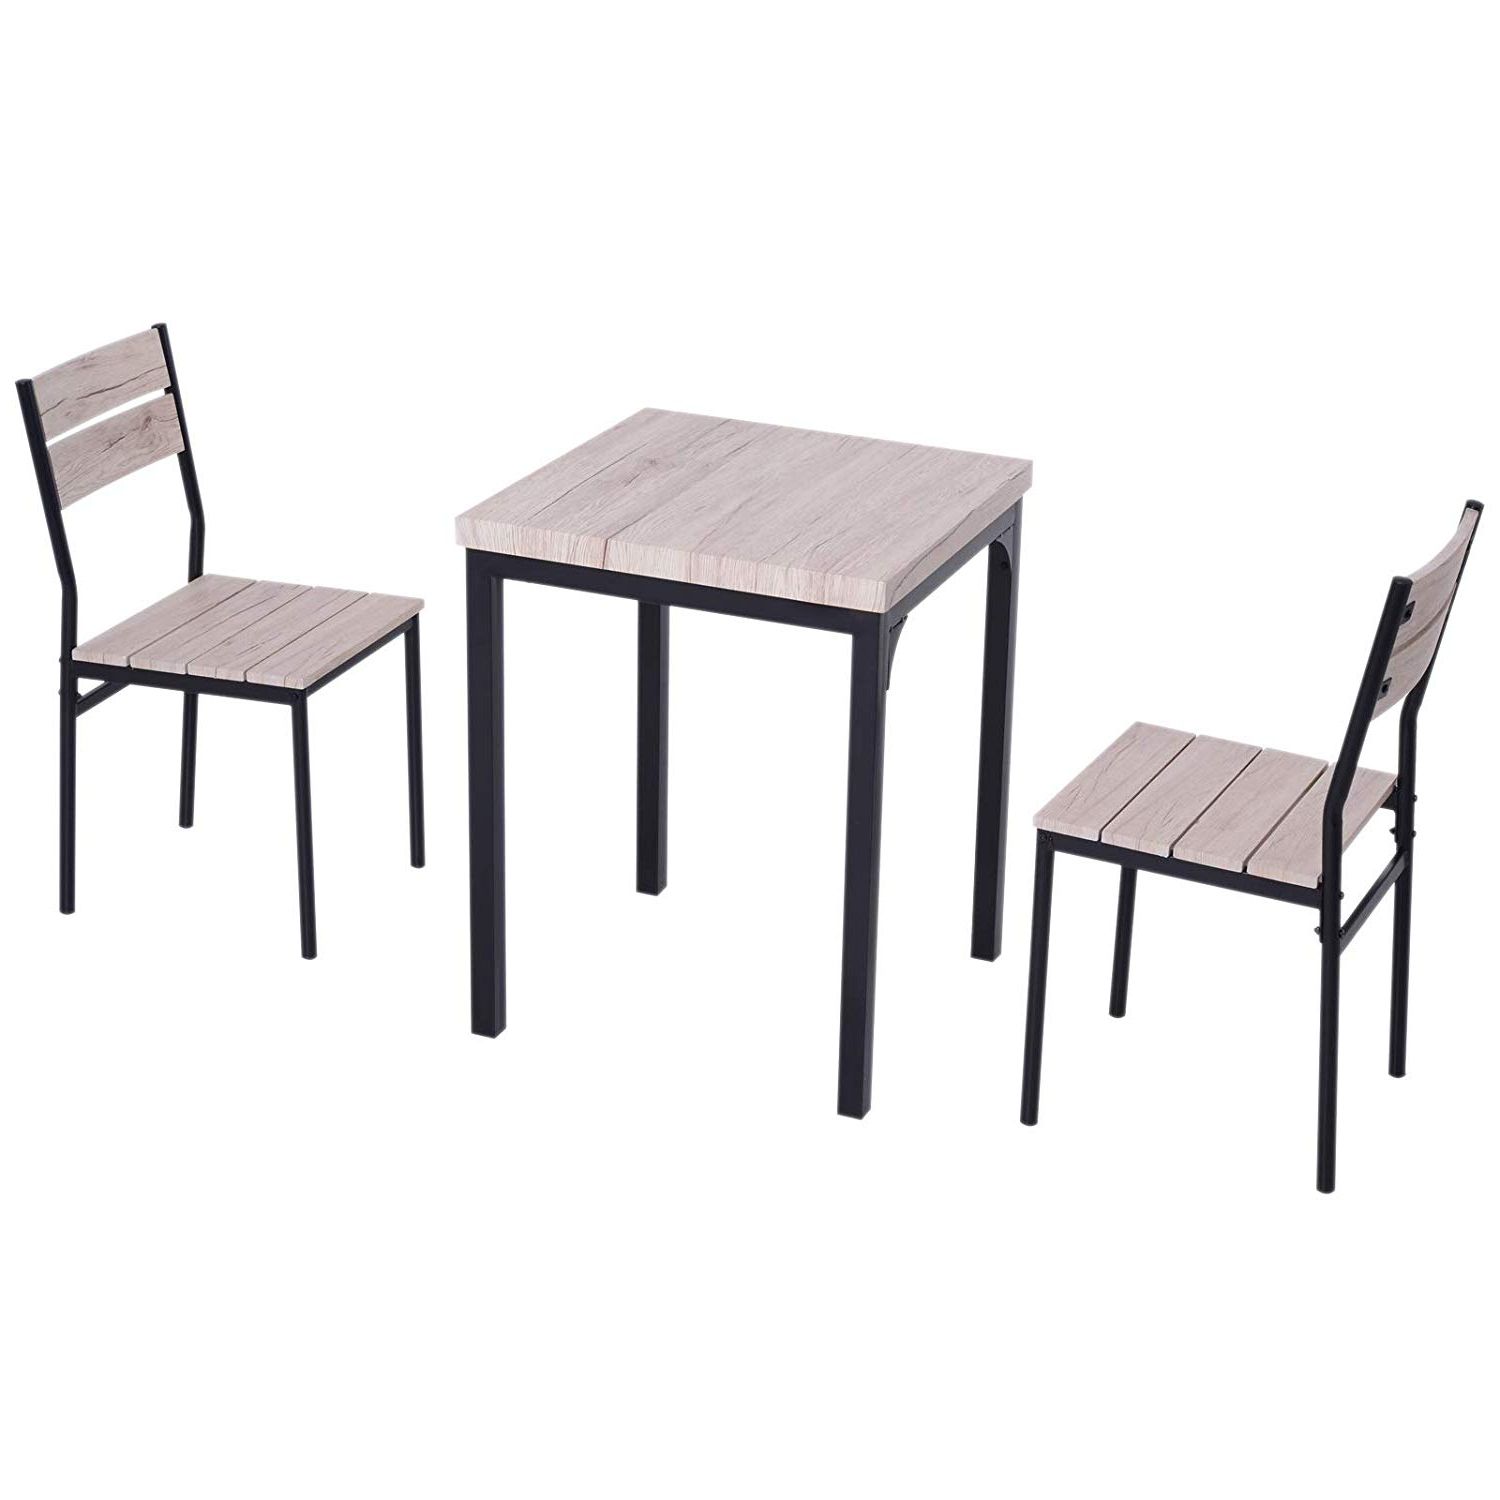 3 Pieces Dining Tables And Chair Set For Recent Homcom 3 Pieces Compact Dining Table 2 Chairs Set Wooden Metal Legs Bistro  Cafe Kitchen Breakfast Bar Home Furniture (View 18 of 25)